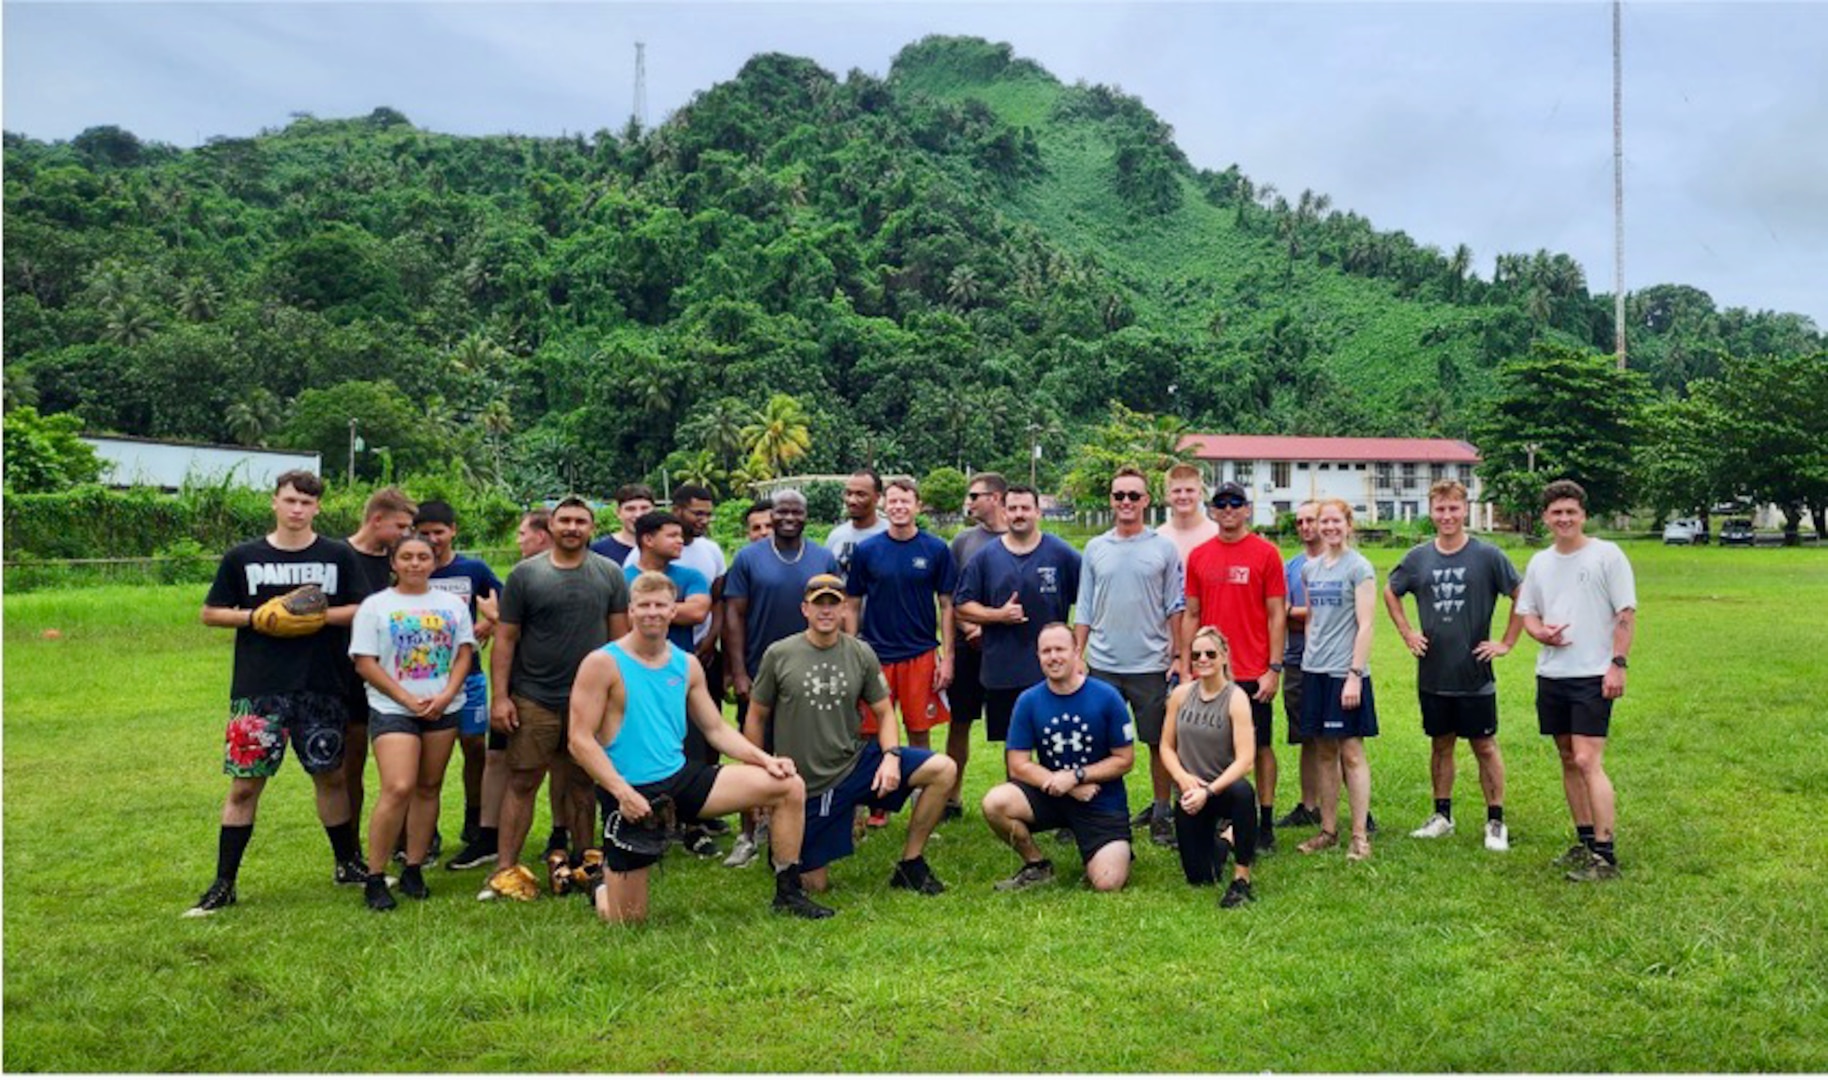 The crew of USCGC Frederick Hatch (WPC 1143) and the Marine Corps Detachment in Chuuk for Operation Koa Moana stand for a photo following a softball game in Chuuk, Federated States of Micronesia, on July 28, 2023, where the Frederick hatch crew own 10 to 6. The crew conducted a patrol in FSM in support of Operation Rematau. (U.S. Coast Guard photo)